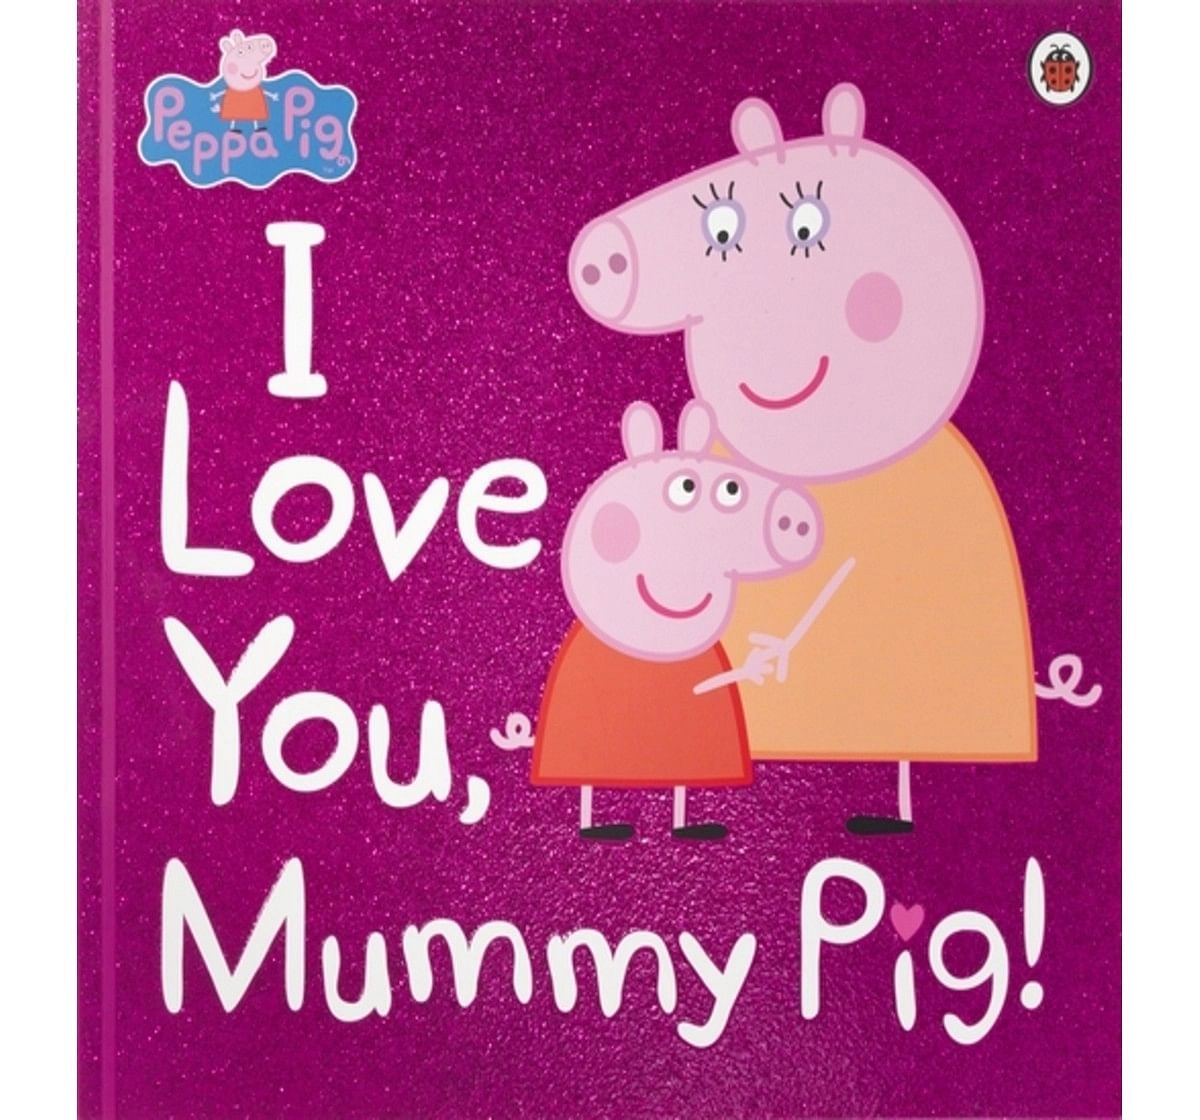 Peppa Pig : I Love You, Mummy Pig, 32 Pages Book by Ladybird, Paperback